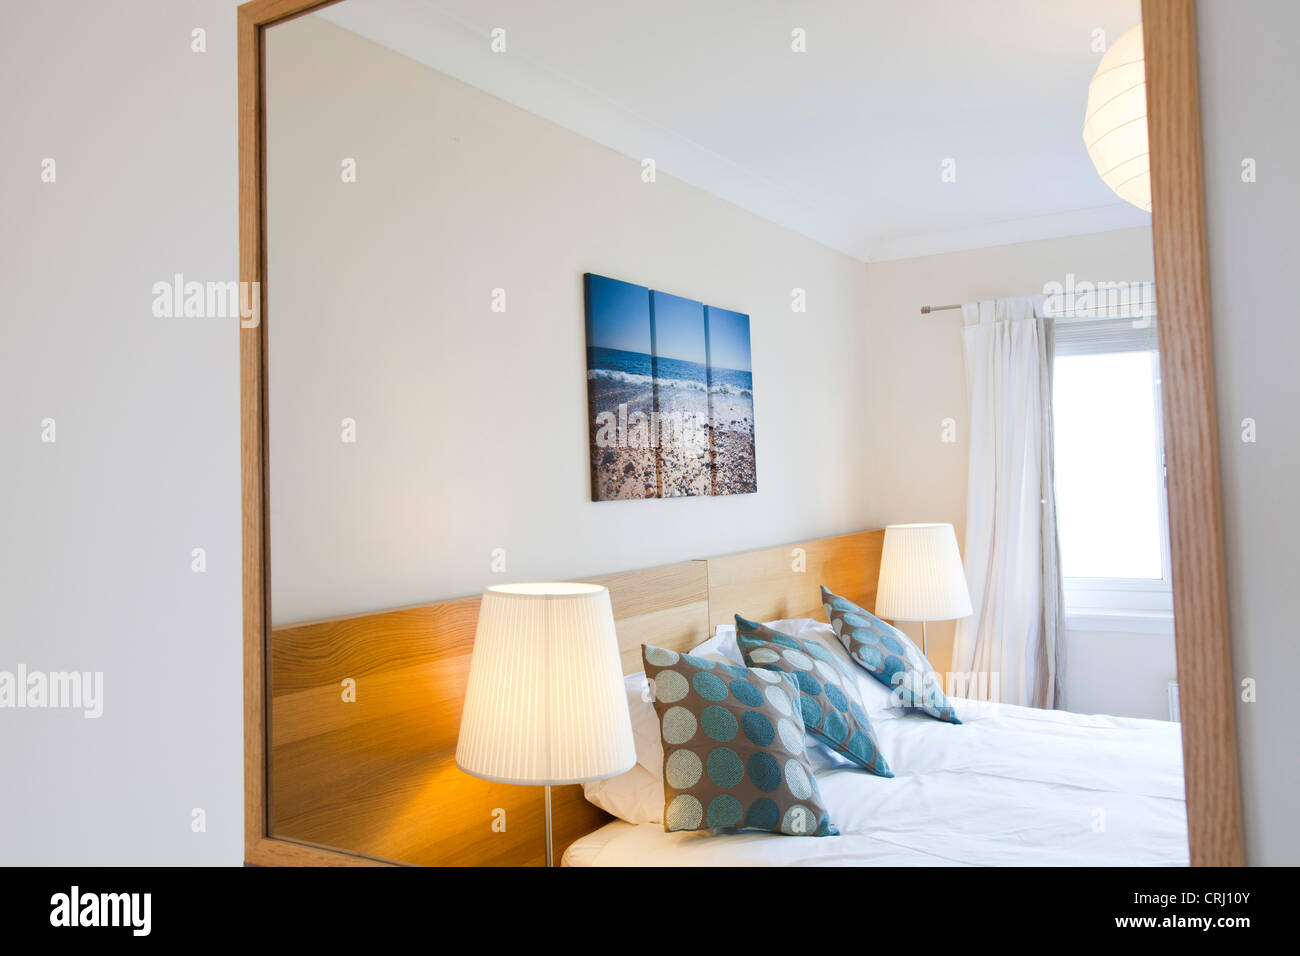 The Bedroom of a holiday cottage in Broadford, Isle of Skye, Scotland, UK. Stock Photo